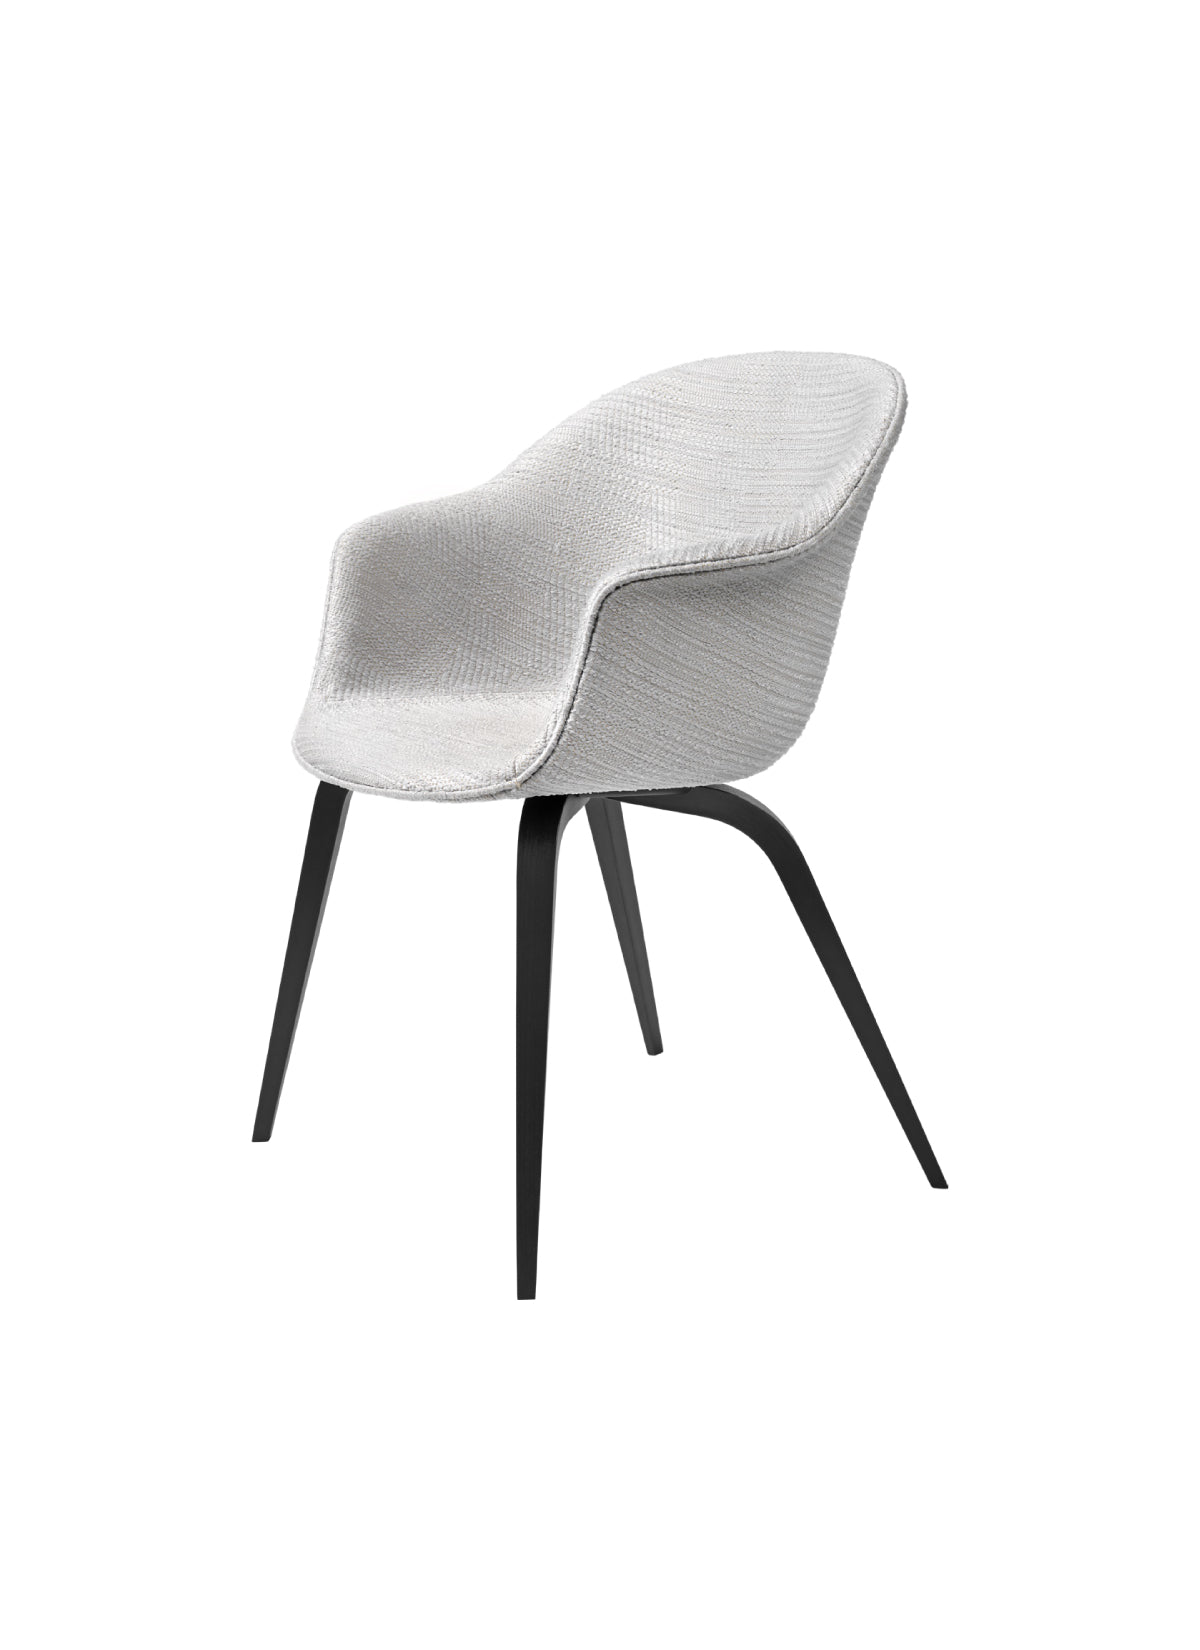 Bat Dining Chair - Fully Upholstered - Wood Base by Gubi